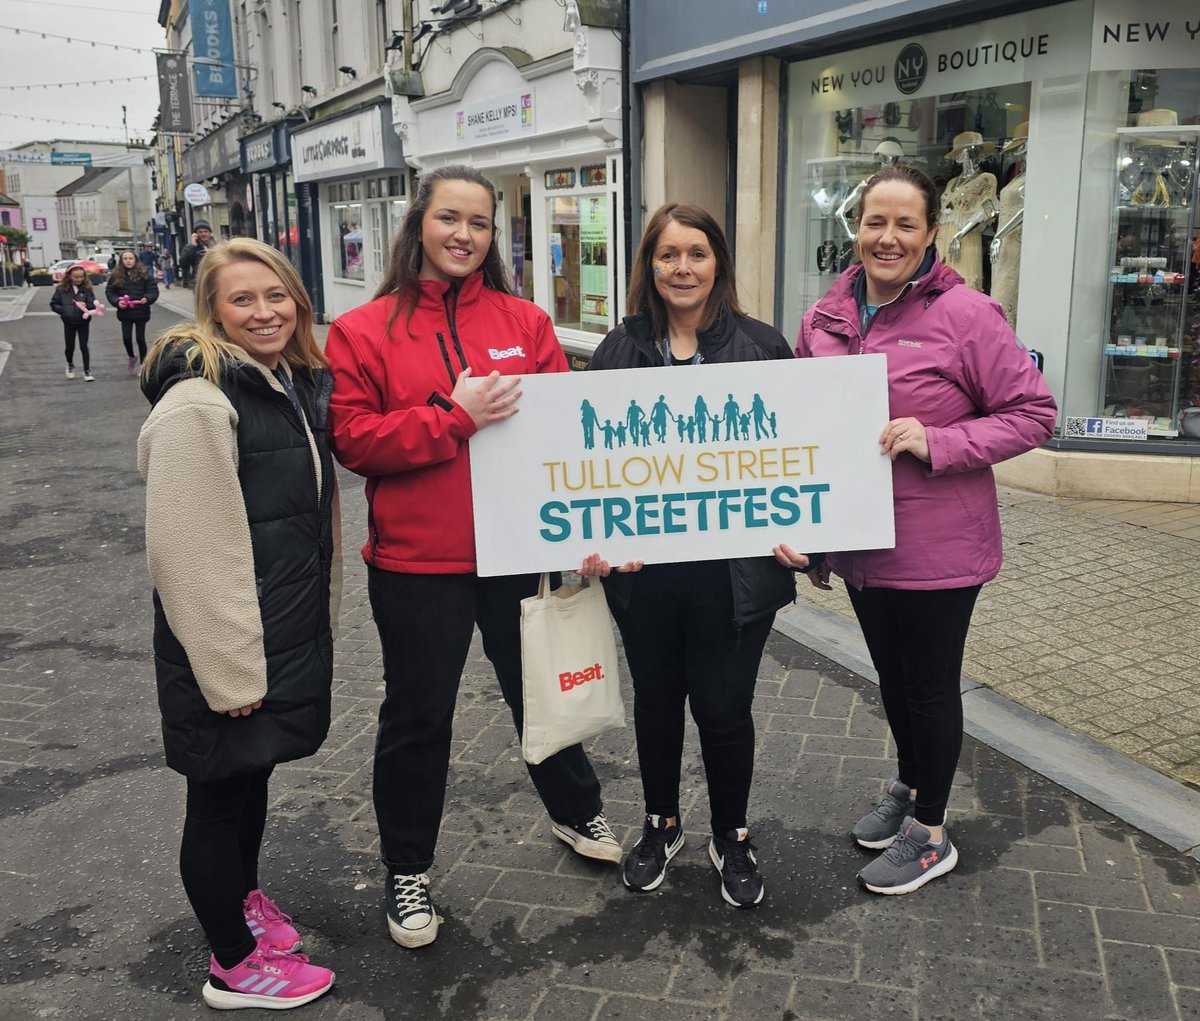 The Carlow LEO team loving the beats on the street from @beat102103  today on Lower Tullow Street!
Lots of fun on the street until 5:30pm - join the fun! 🎉🎉  
#streetfestcarlow 
@carlow_co_co @carlowppn @carlowtourism @allaboutcarlow